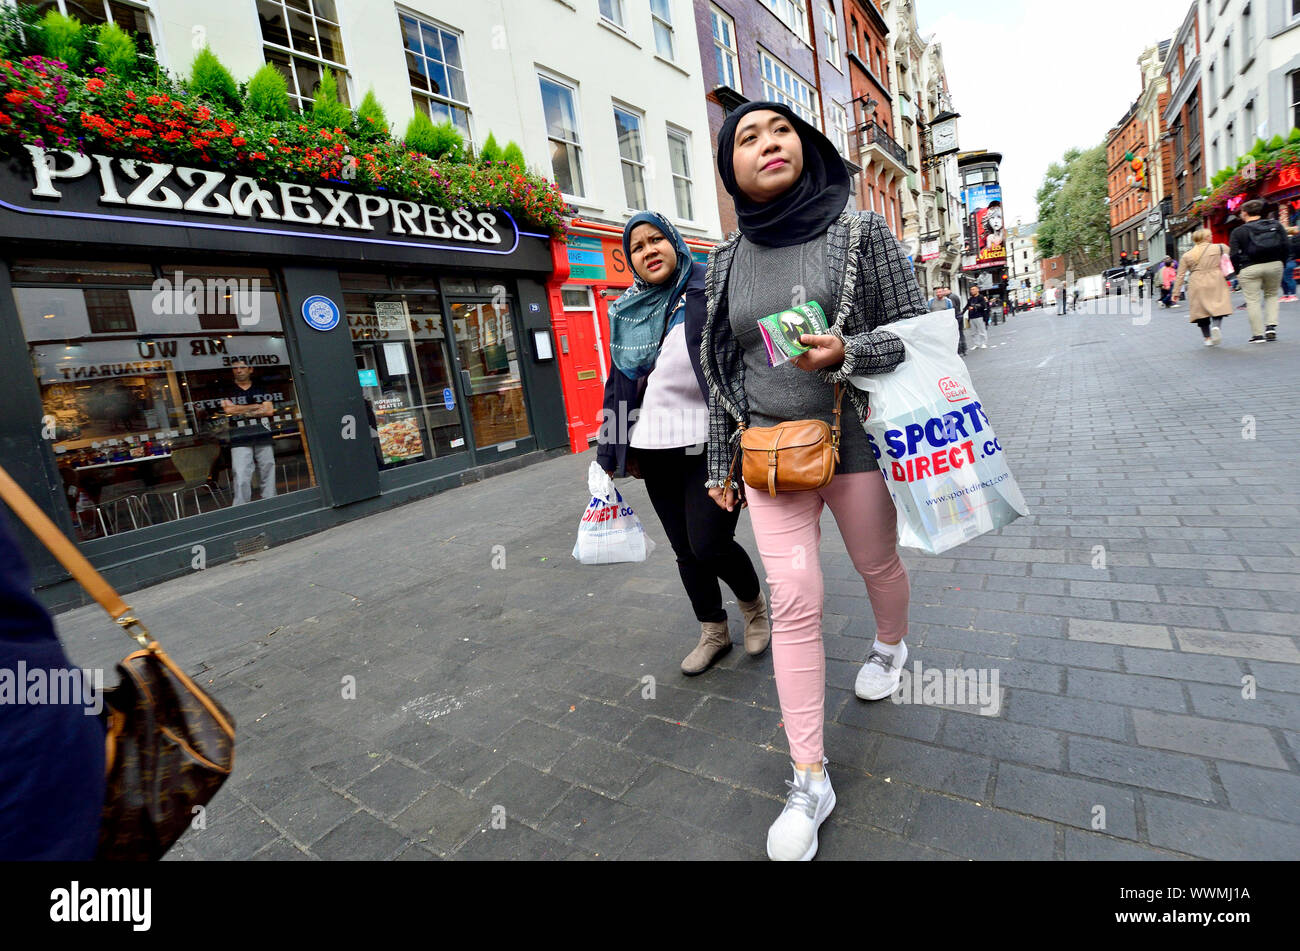 London, England, UK. Women with headscarves shopping in Chinatown Stock Photo